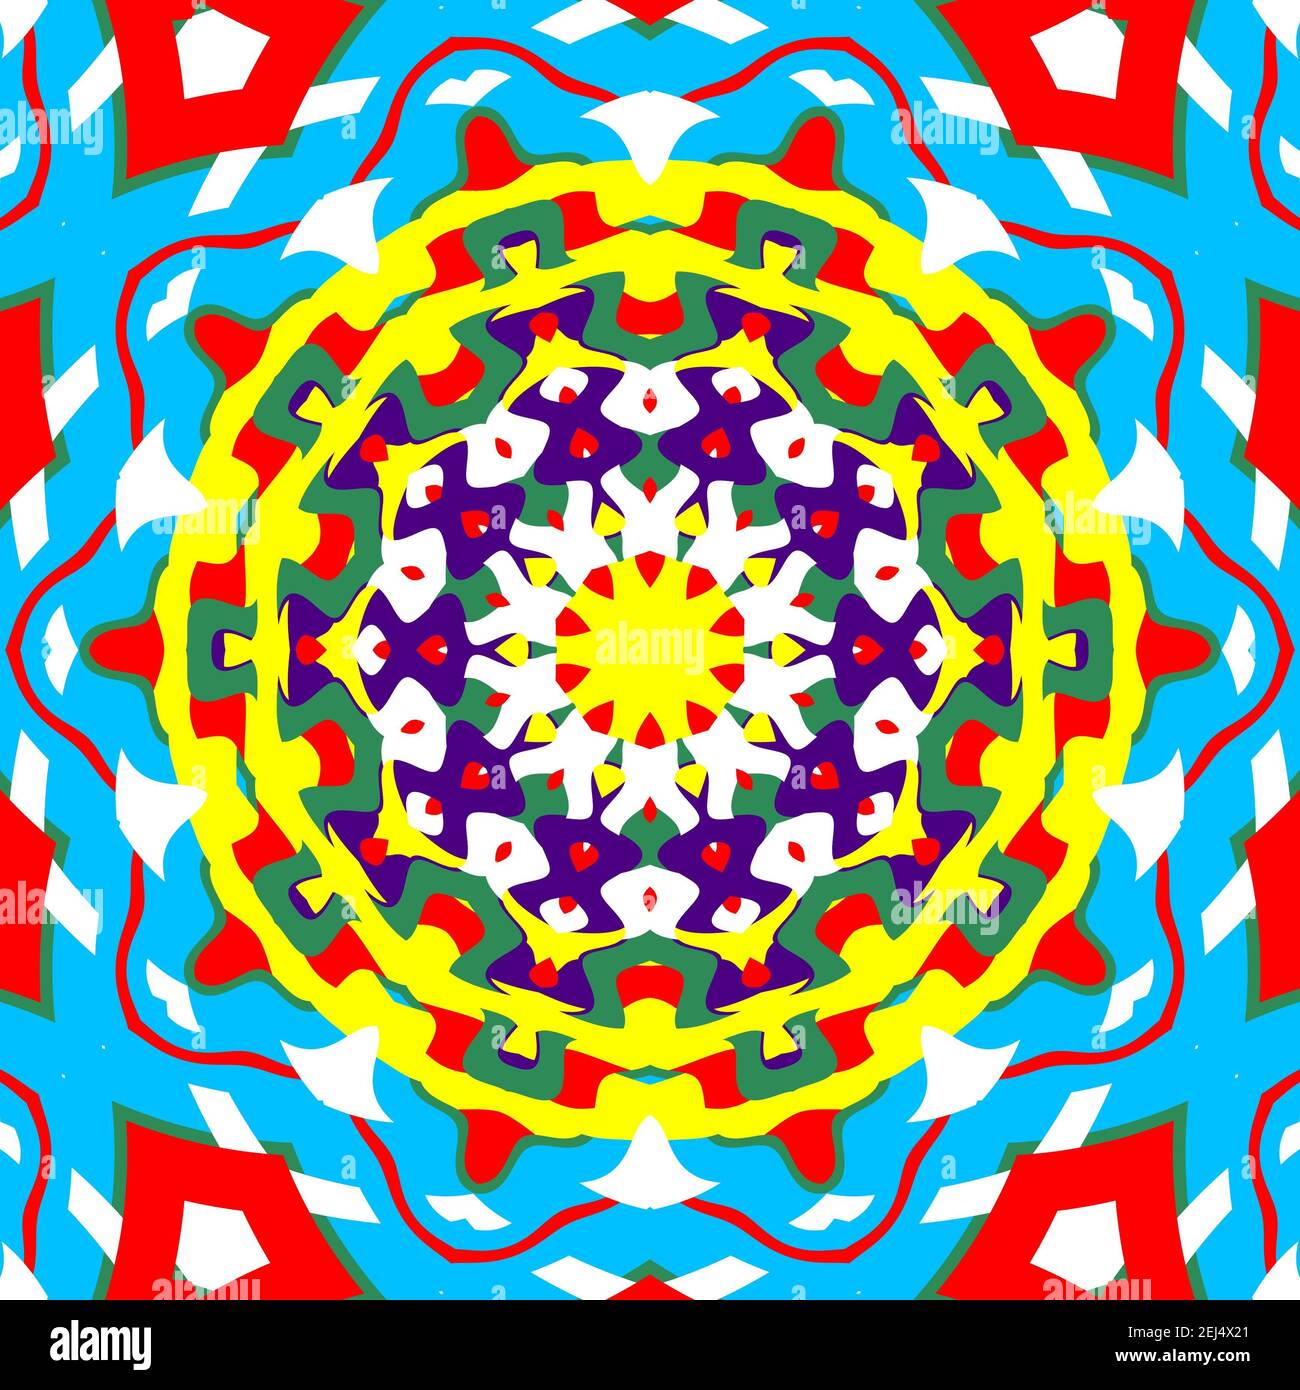 Mandala background wallpaper. colors used red, yellow, sky blue, white.  Ideal for Ornament for decorating a greeting card, decor, decorations,  overlay Stock Photo - Alamy